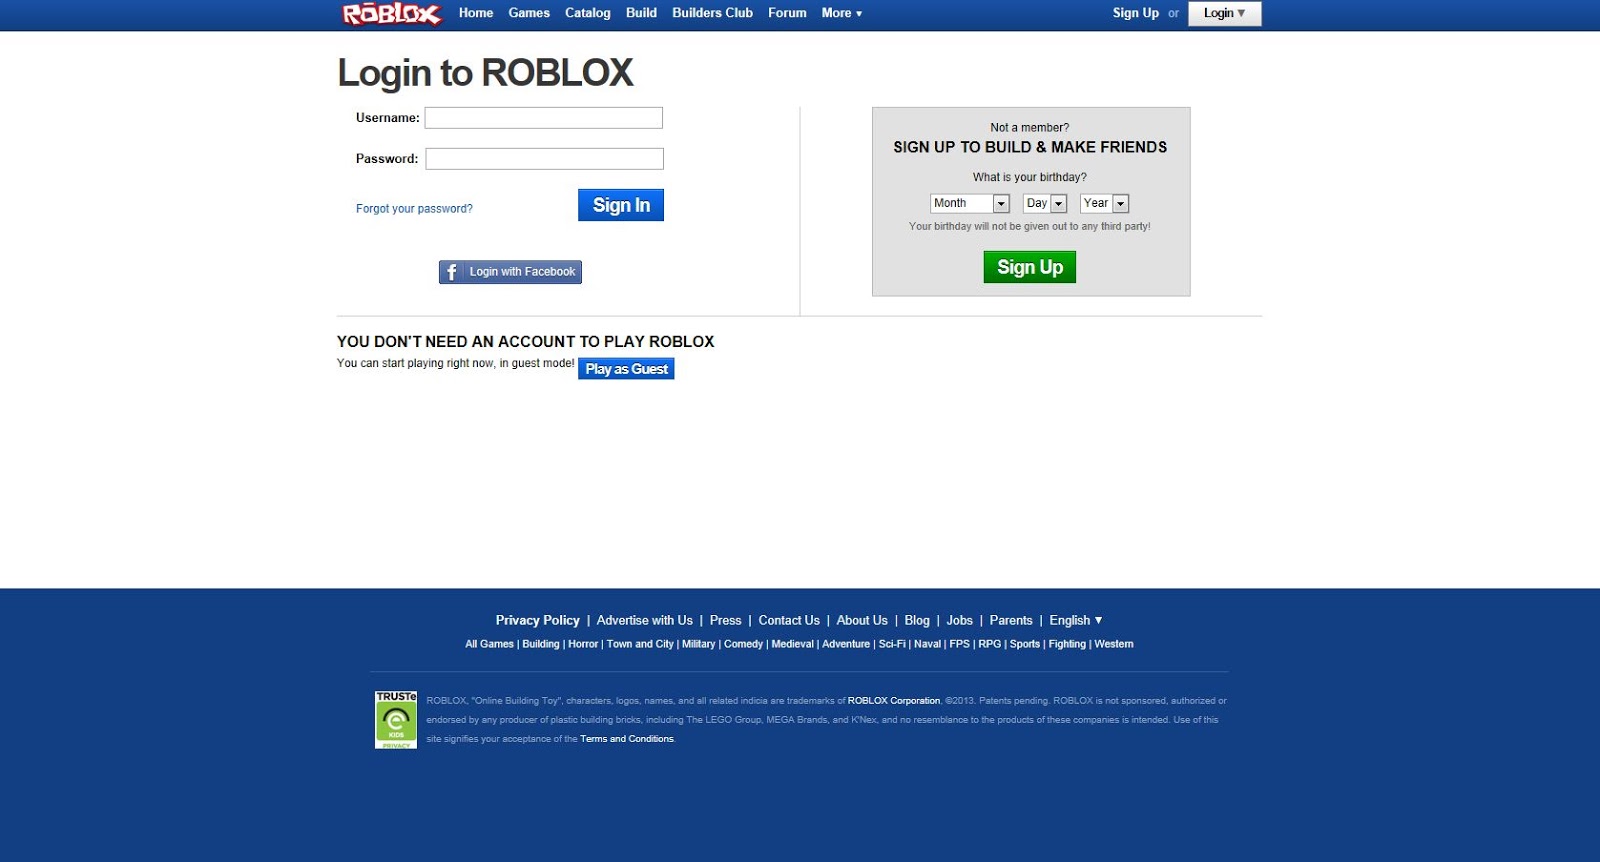 Unofficial Roblox Roblox Blue Panel Update On Website - roblox login sign in page